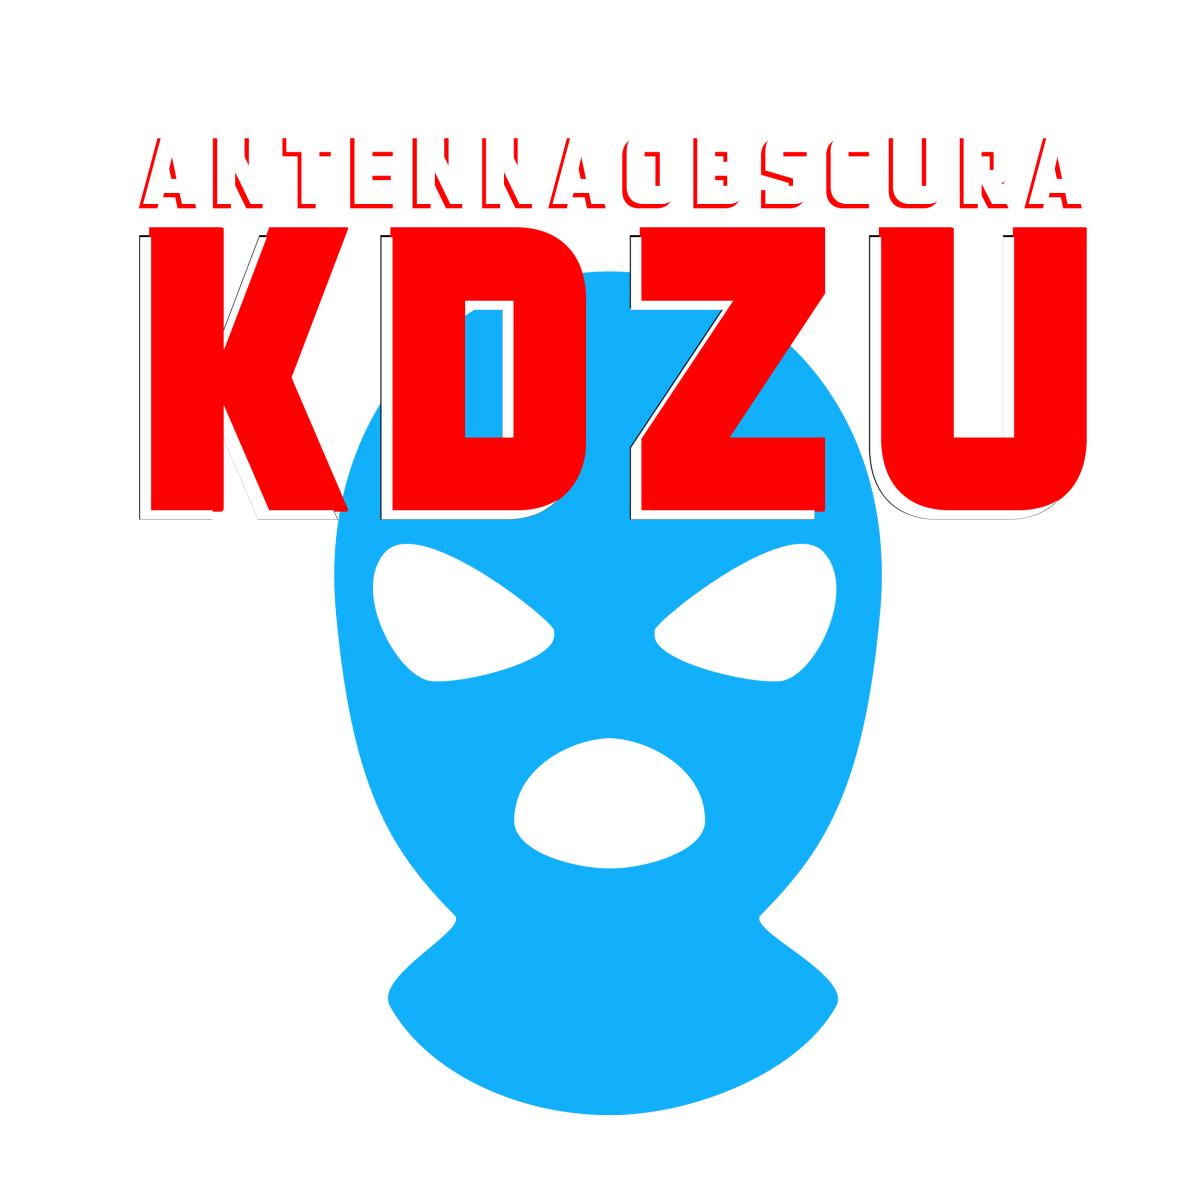 Large red text that spells KDZU. White sub-header text that spells "antennaobscura." Royal blue ski mask in the background.